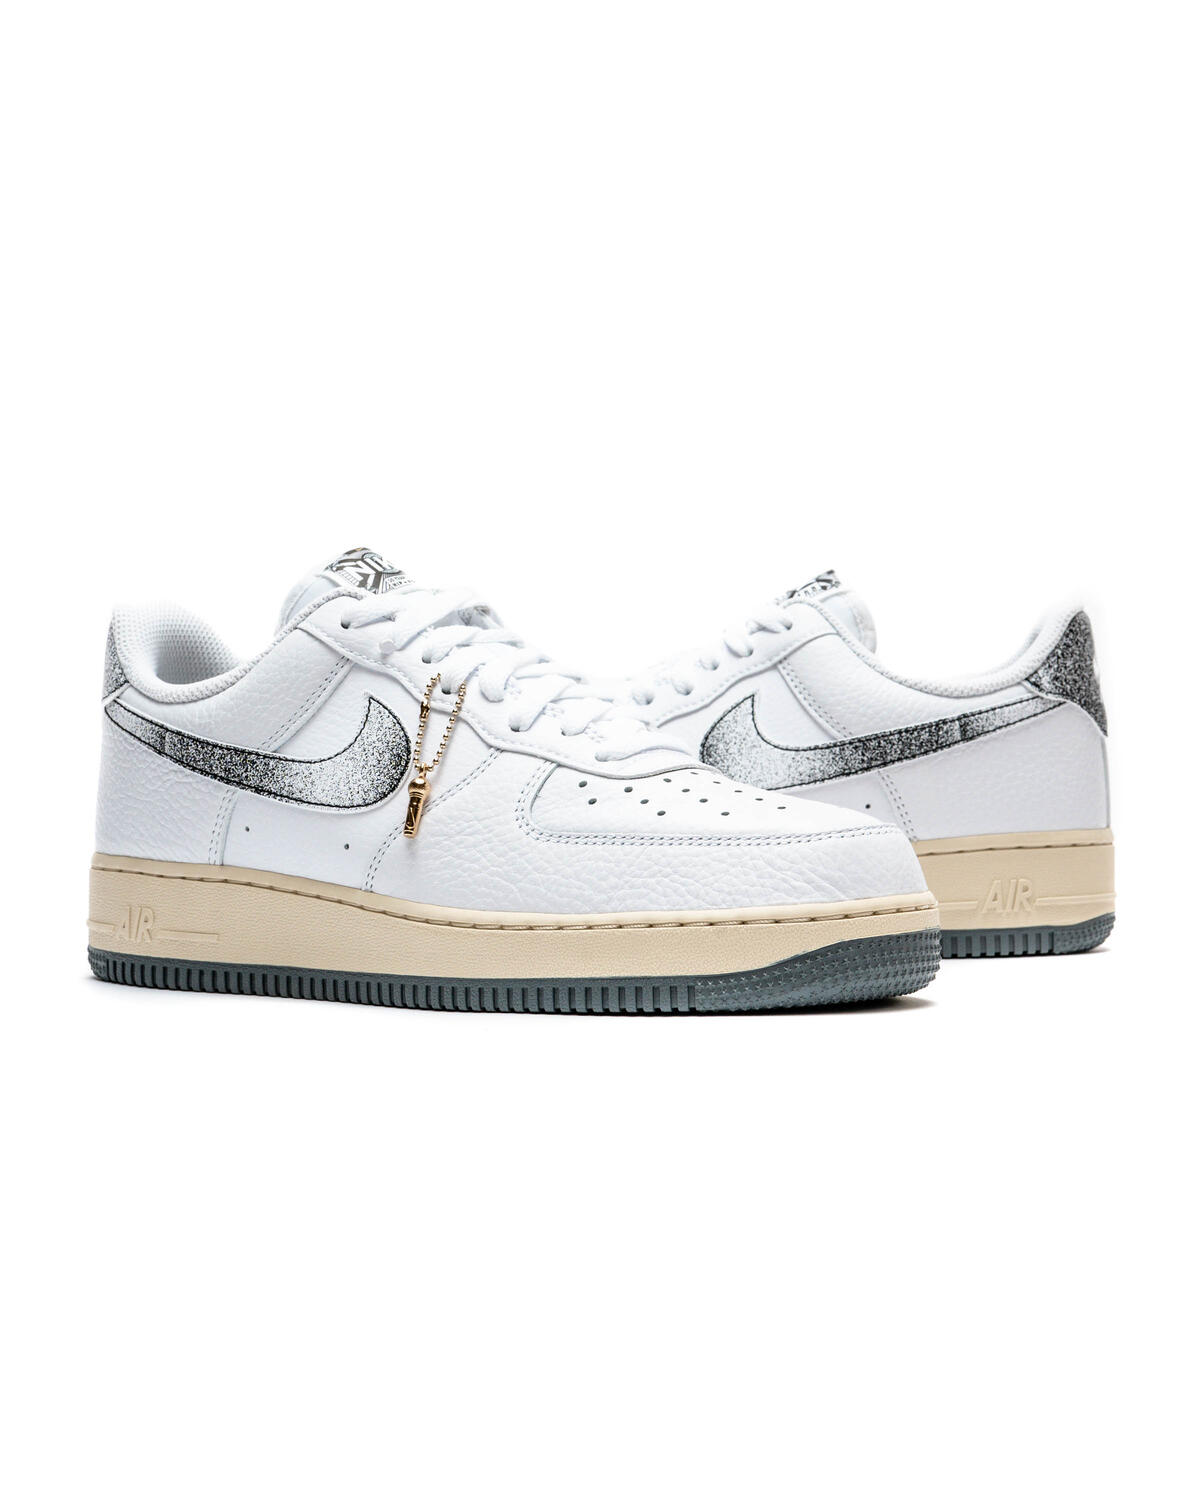 Men's Nike Air Force 1 '07 LX Worldwide Casual Shoes